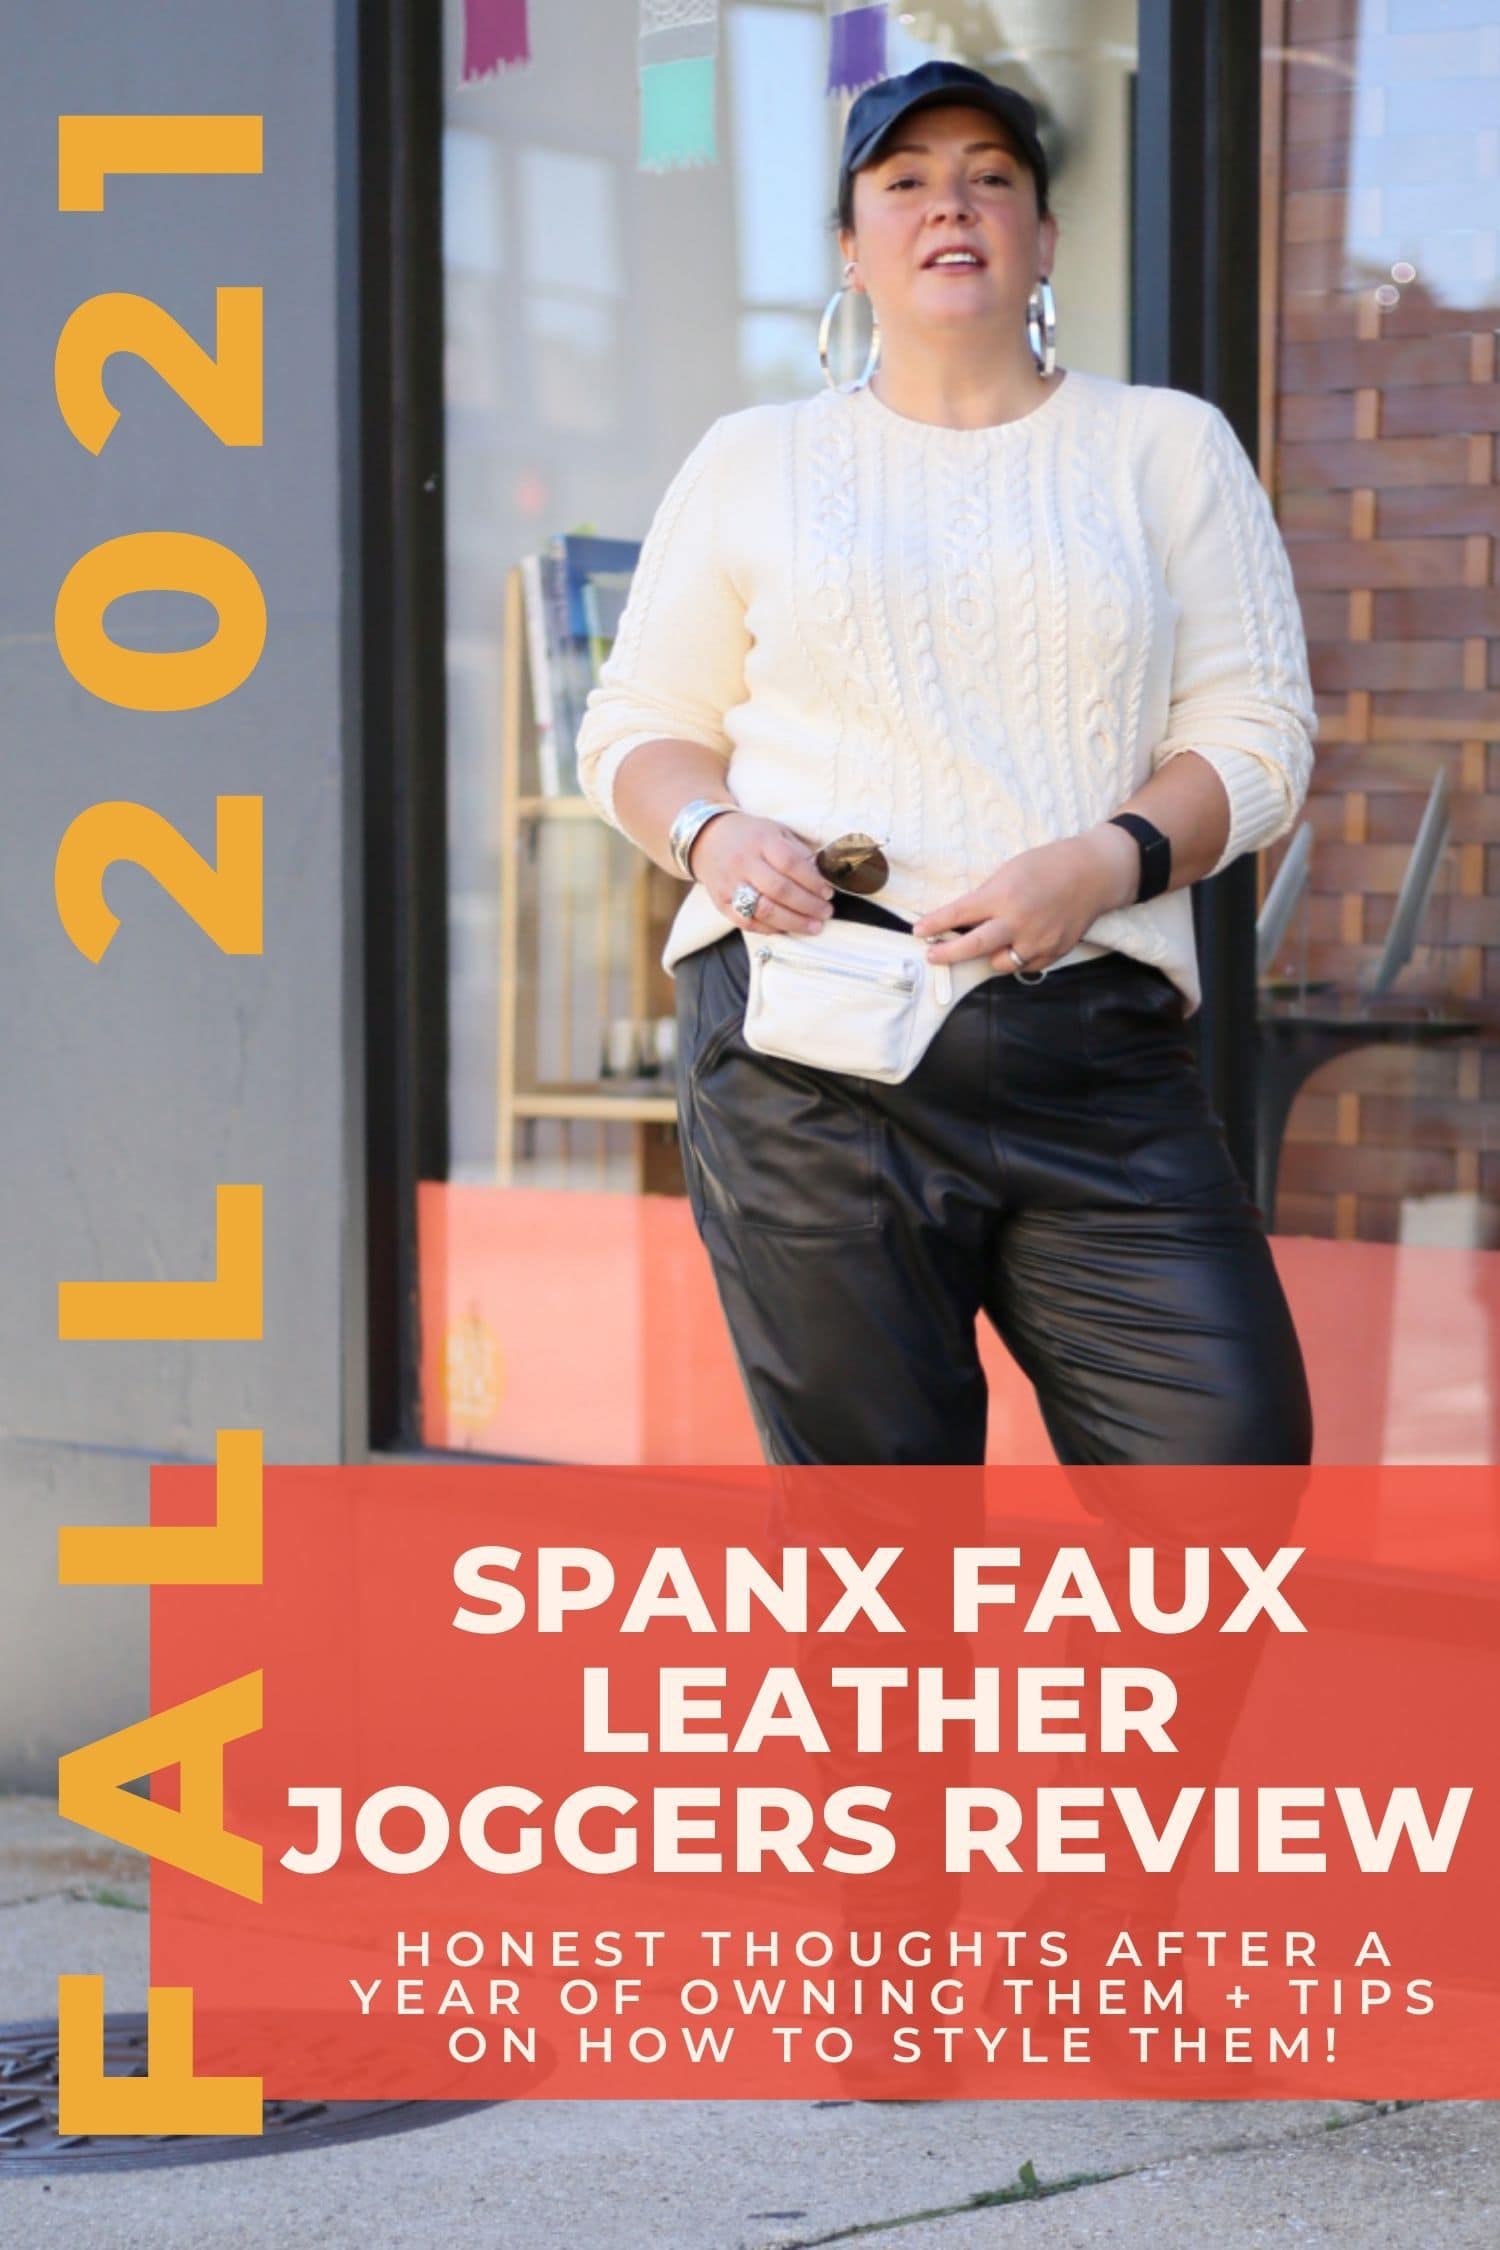 SPANX - New! New! New! The Leather-Like Jogger is sure to